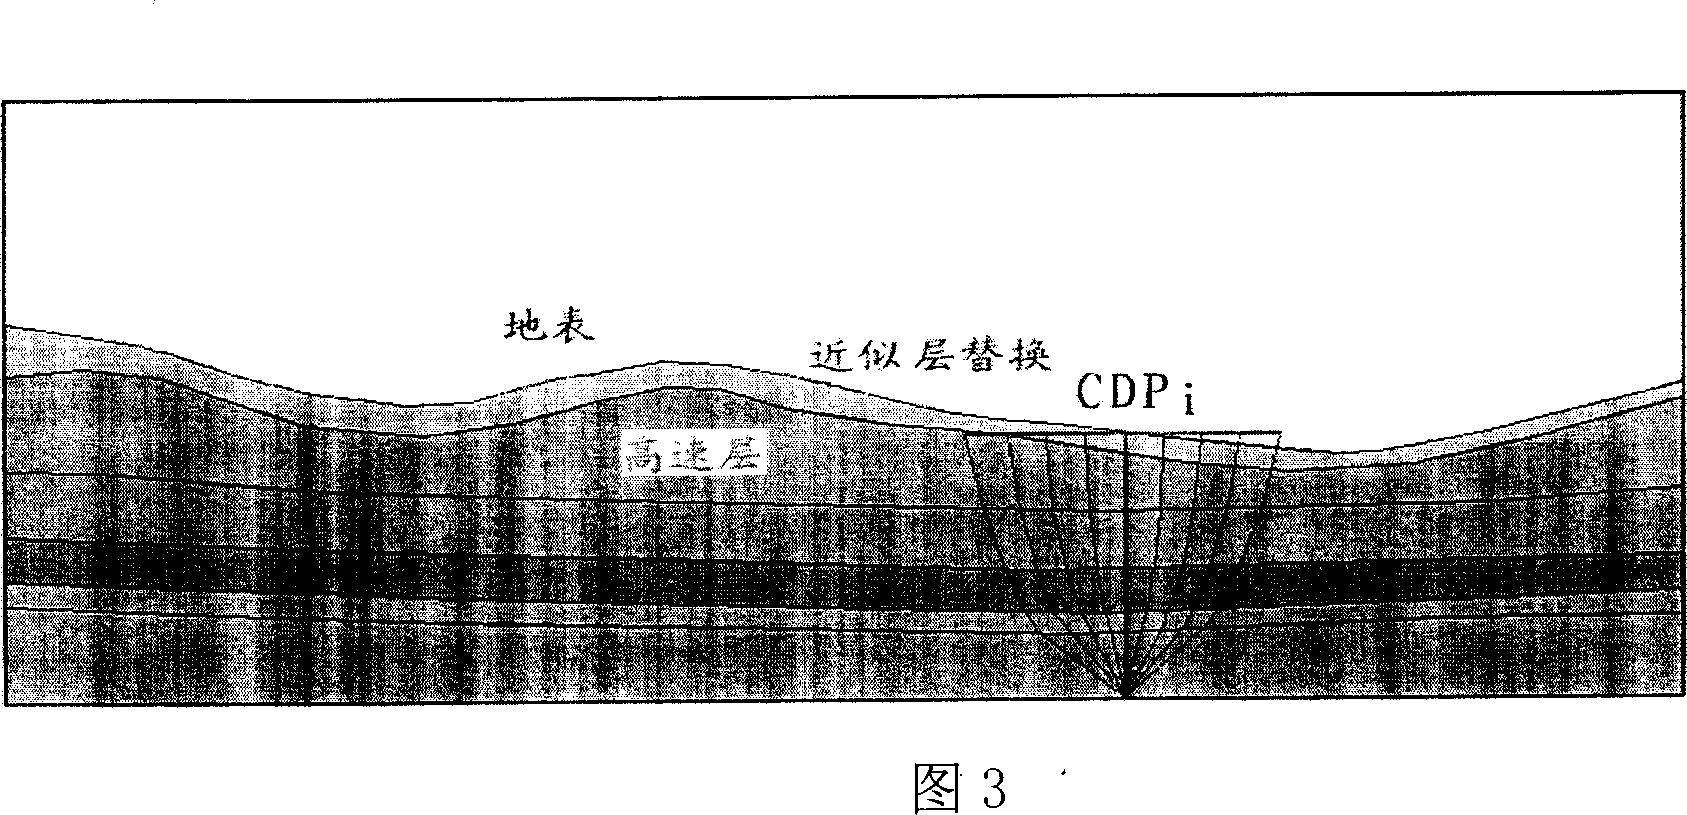 Method of approximating layer displacing static correct